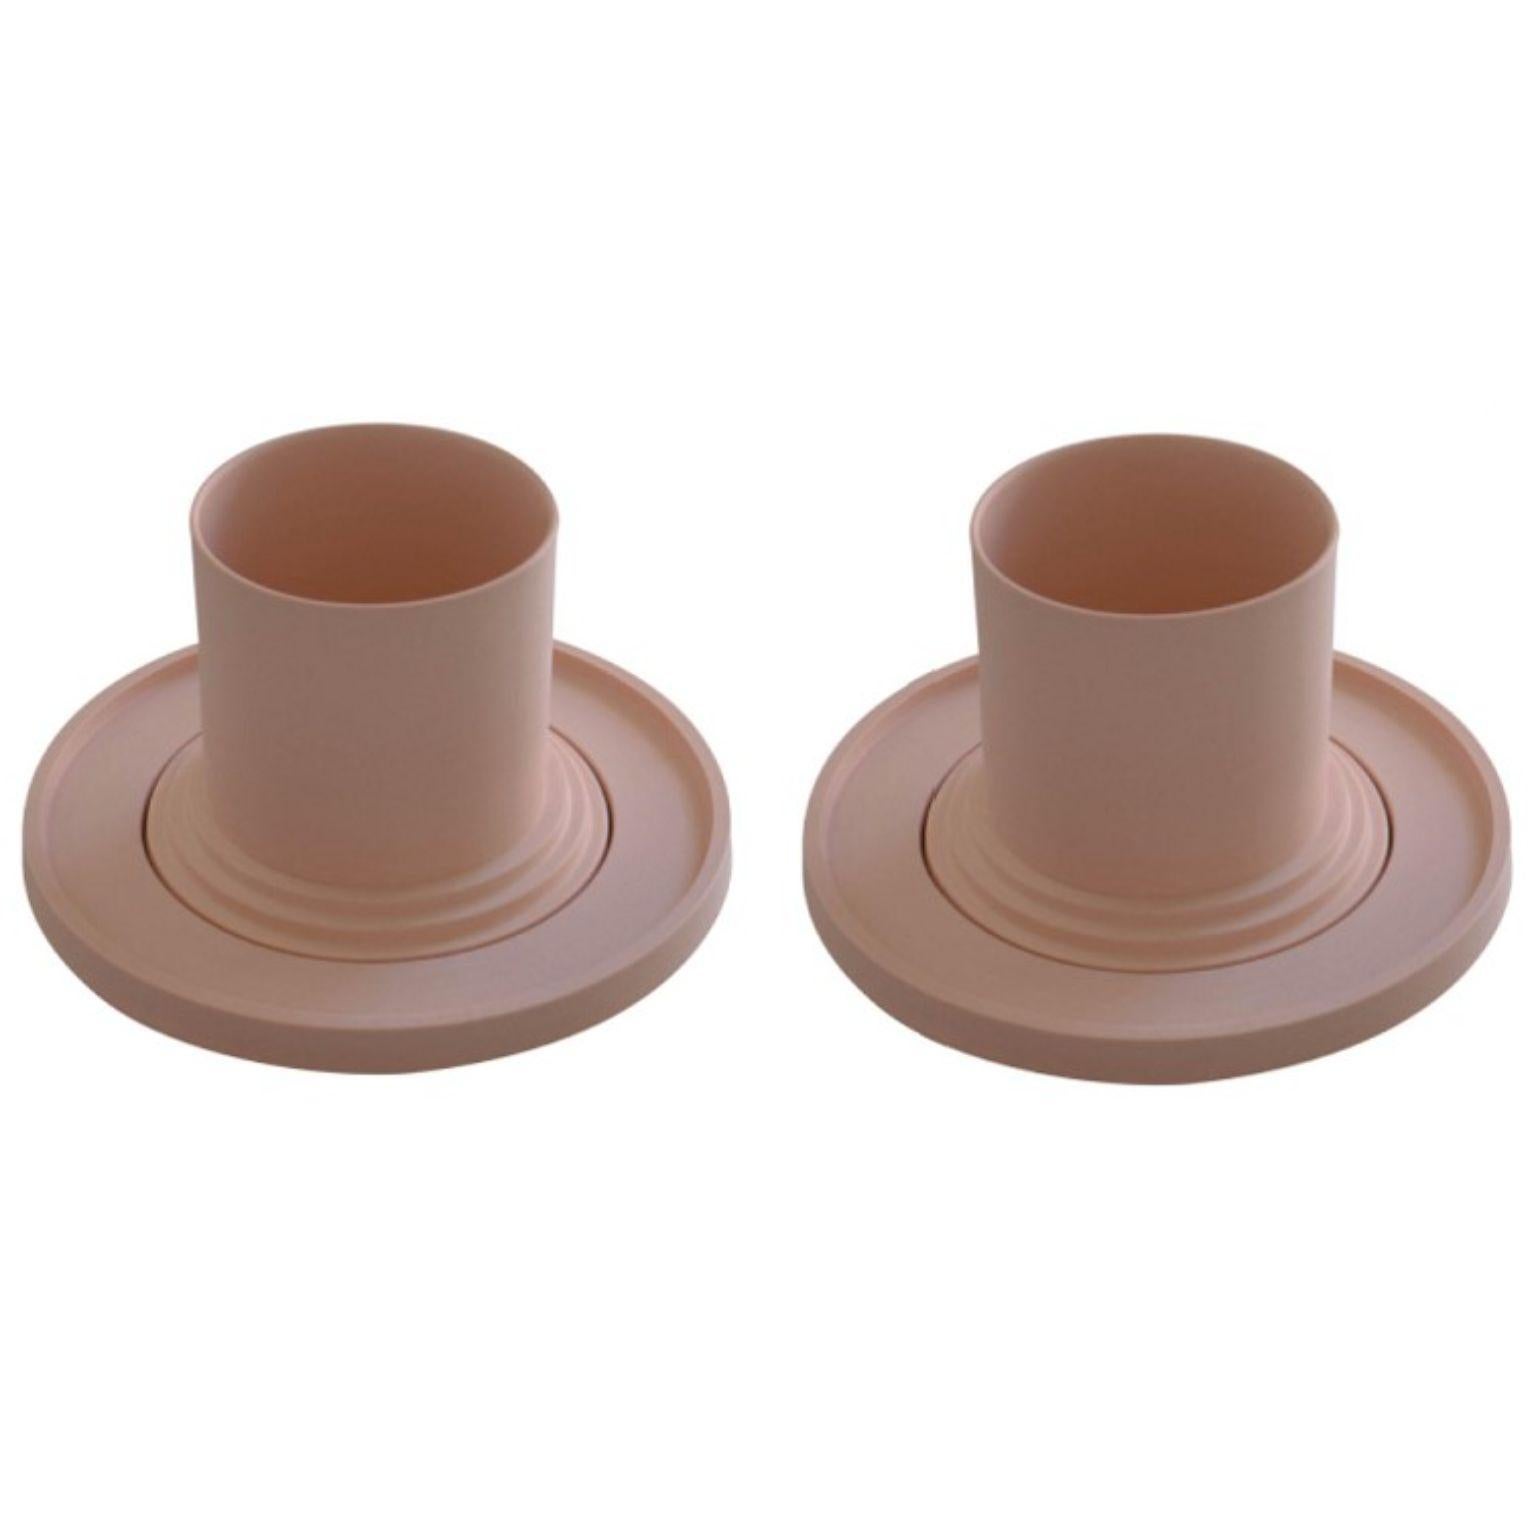 Set of 2 porcelain Amal cups by Sizar Alexis
Year 2019
Dimensions: H 7.5cm, Ø 6.7cm and holds.
22cl and the saucer H 1.2cm and Ø 14.7cm.
Porcelain.
All pieces are signed.

About Sizar Alexis
Sizar Alexis is a Swedish-Iraqi product and